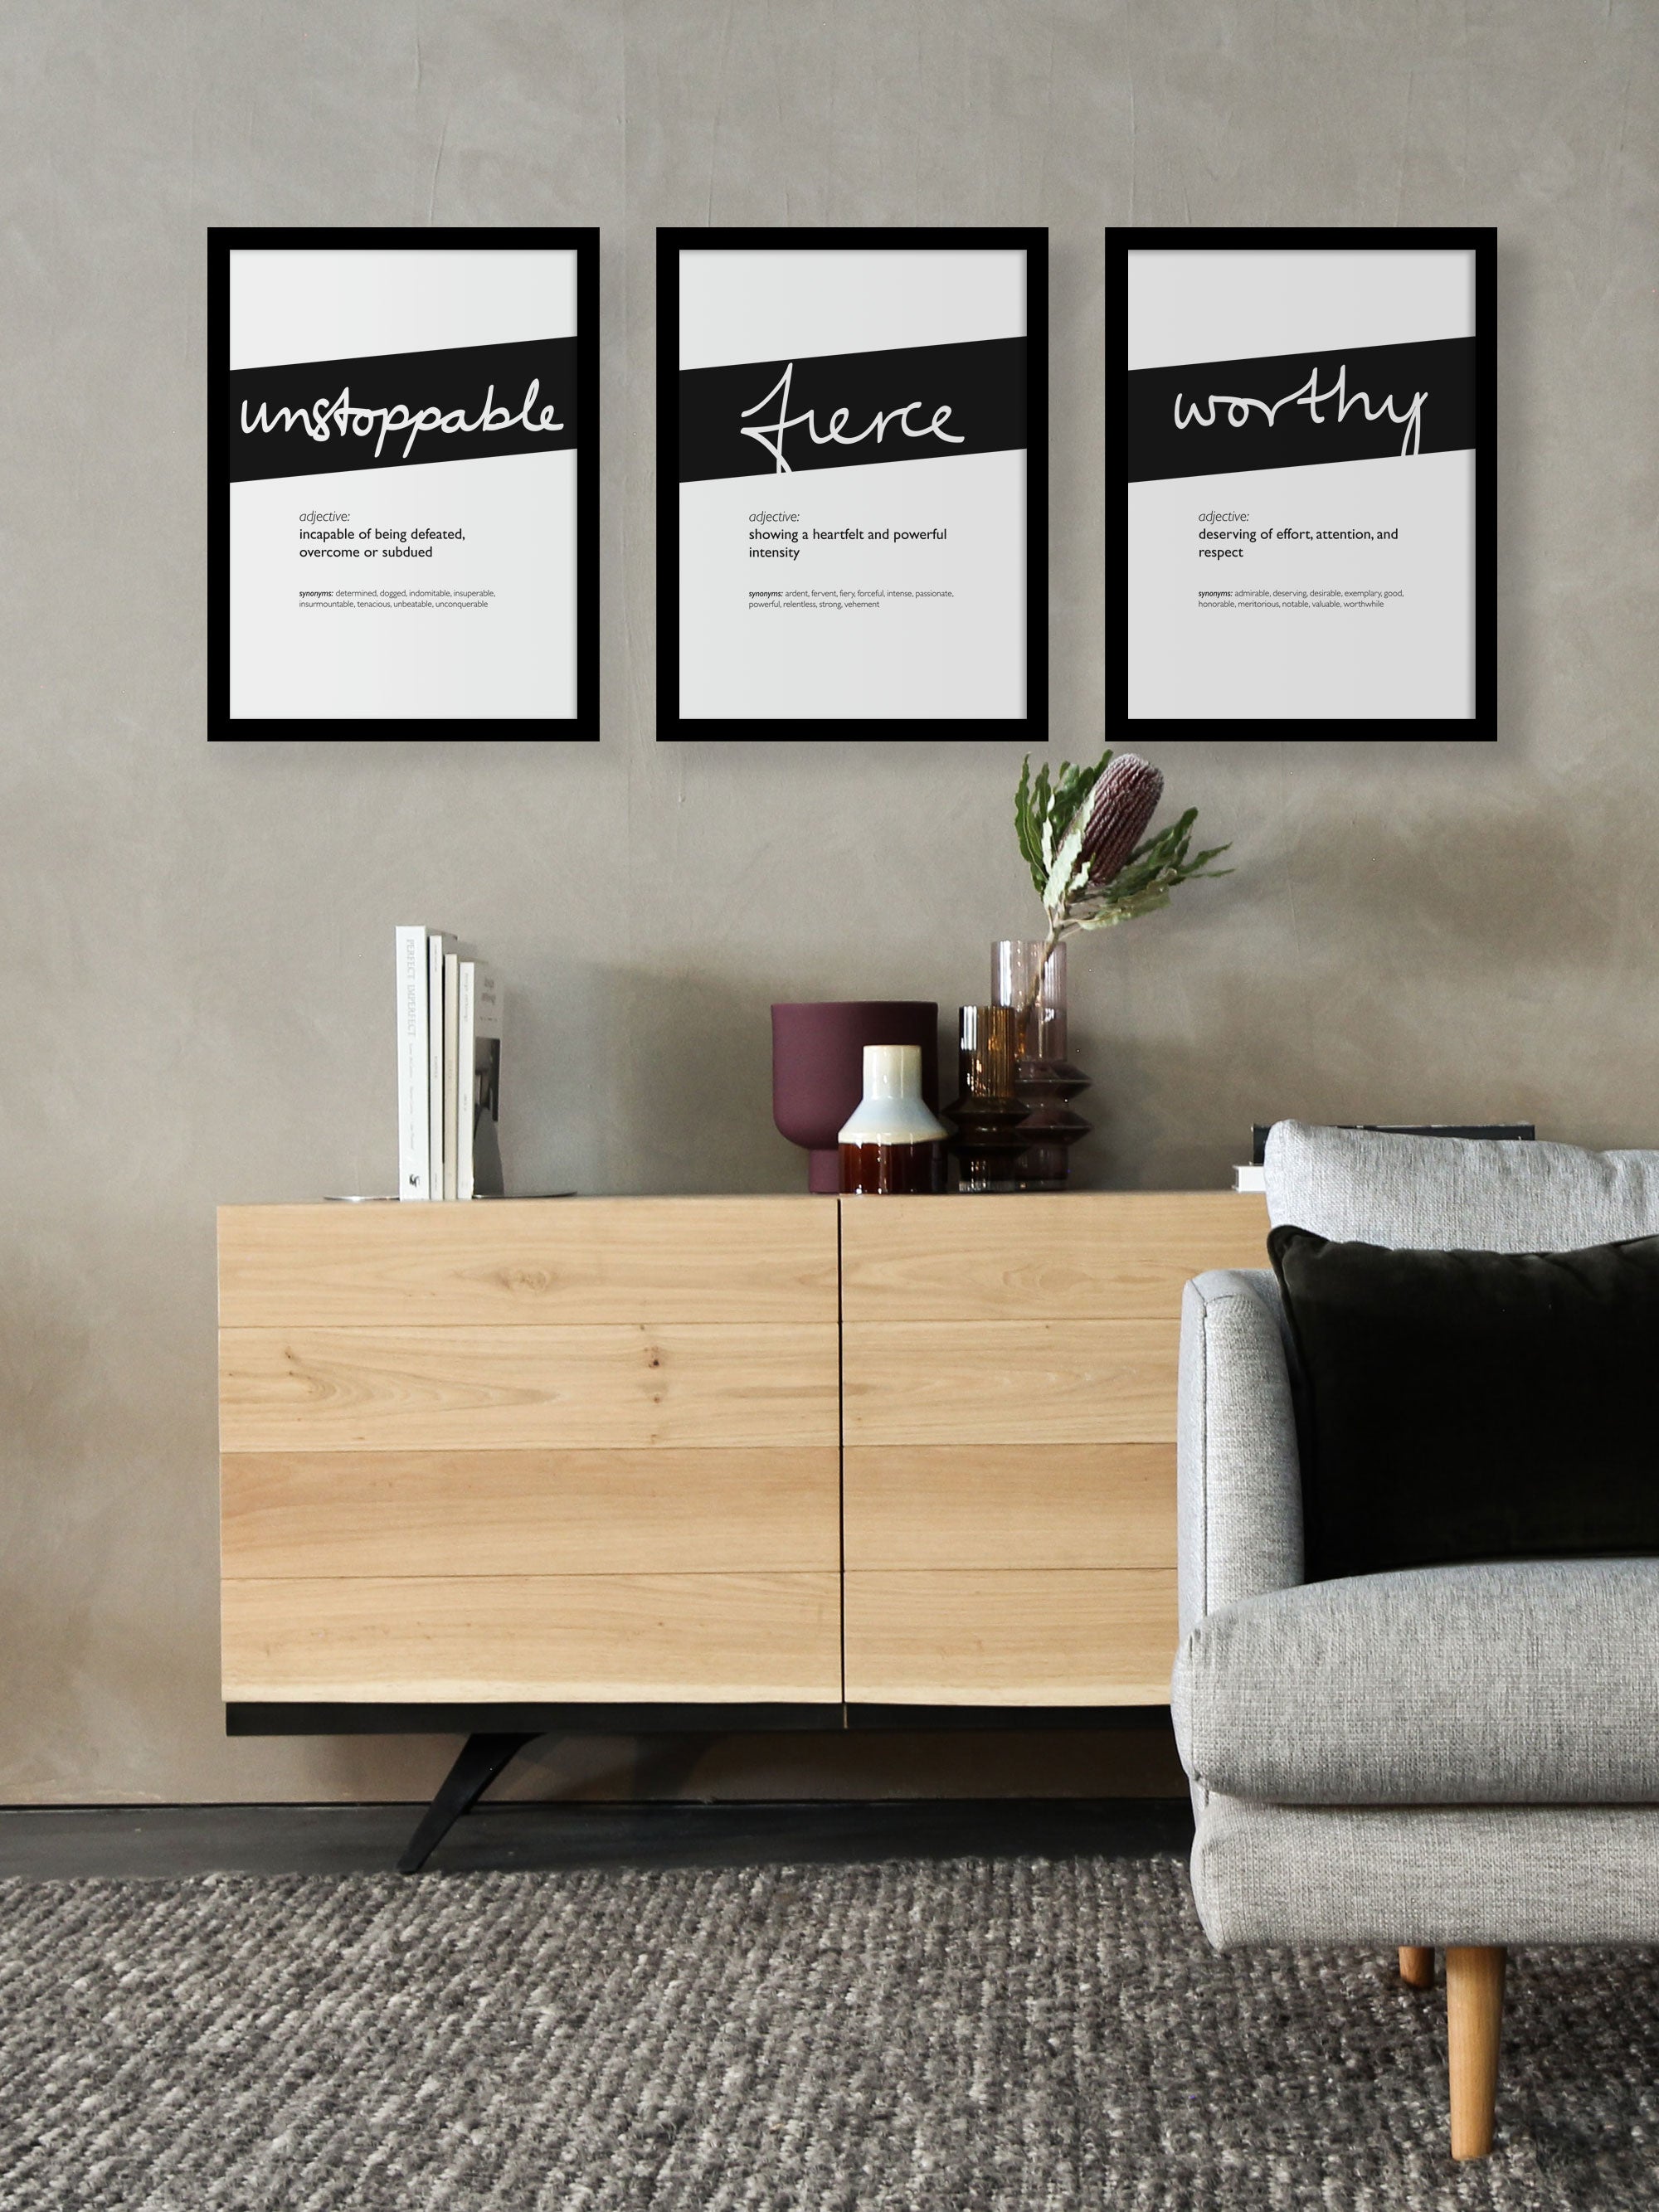 Framed Black Unstoppable Print With Word Definition - High Quality, Affordable, Hand Written, Empowering, Self Love, Mantra Word Print. Archival-Quality, Matte Giclée Print - Brevity Jewelry